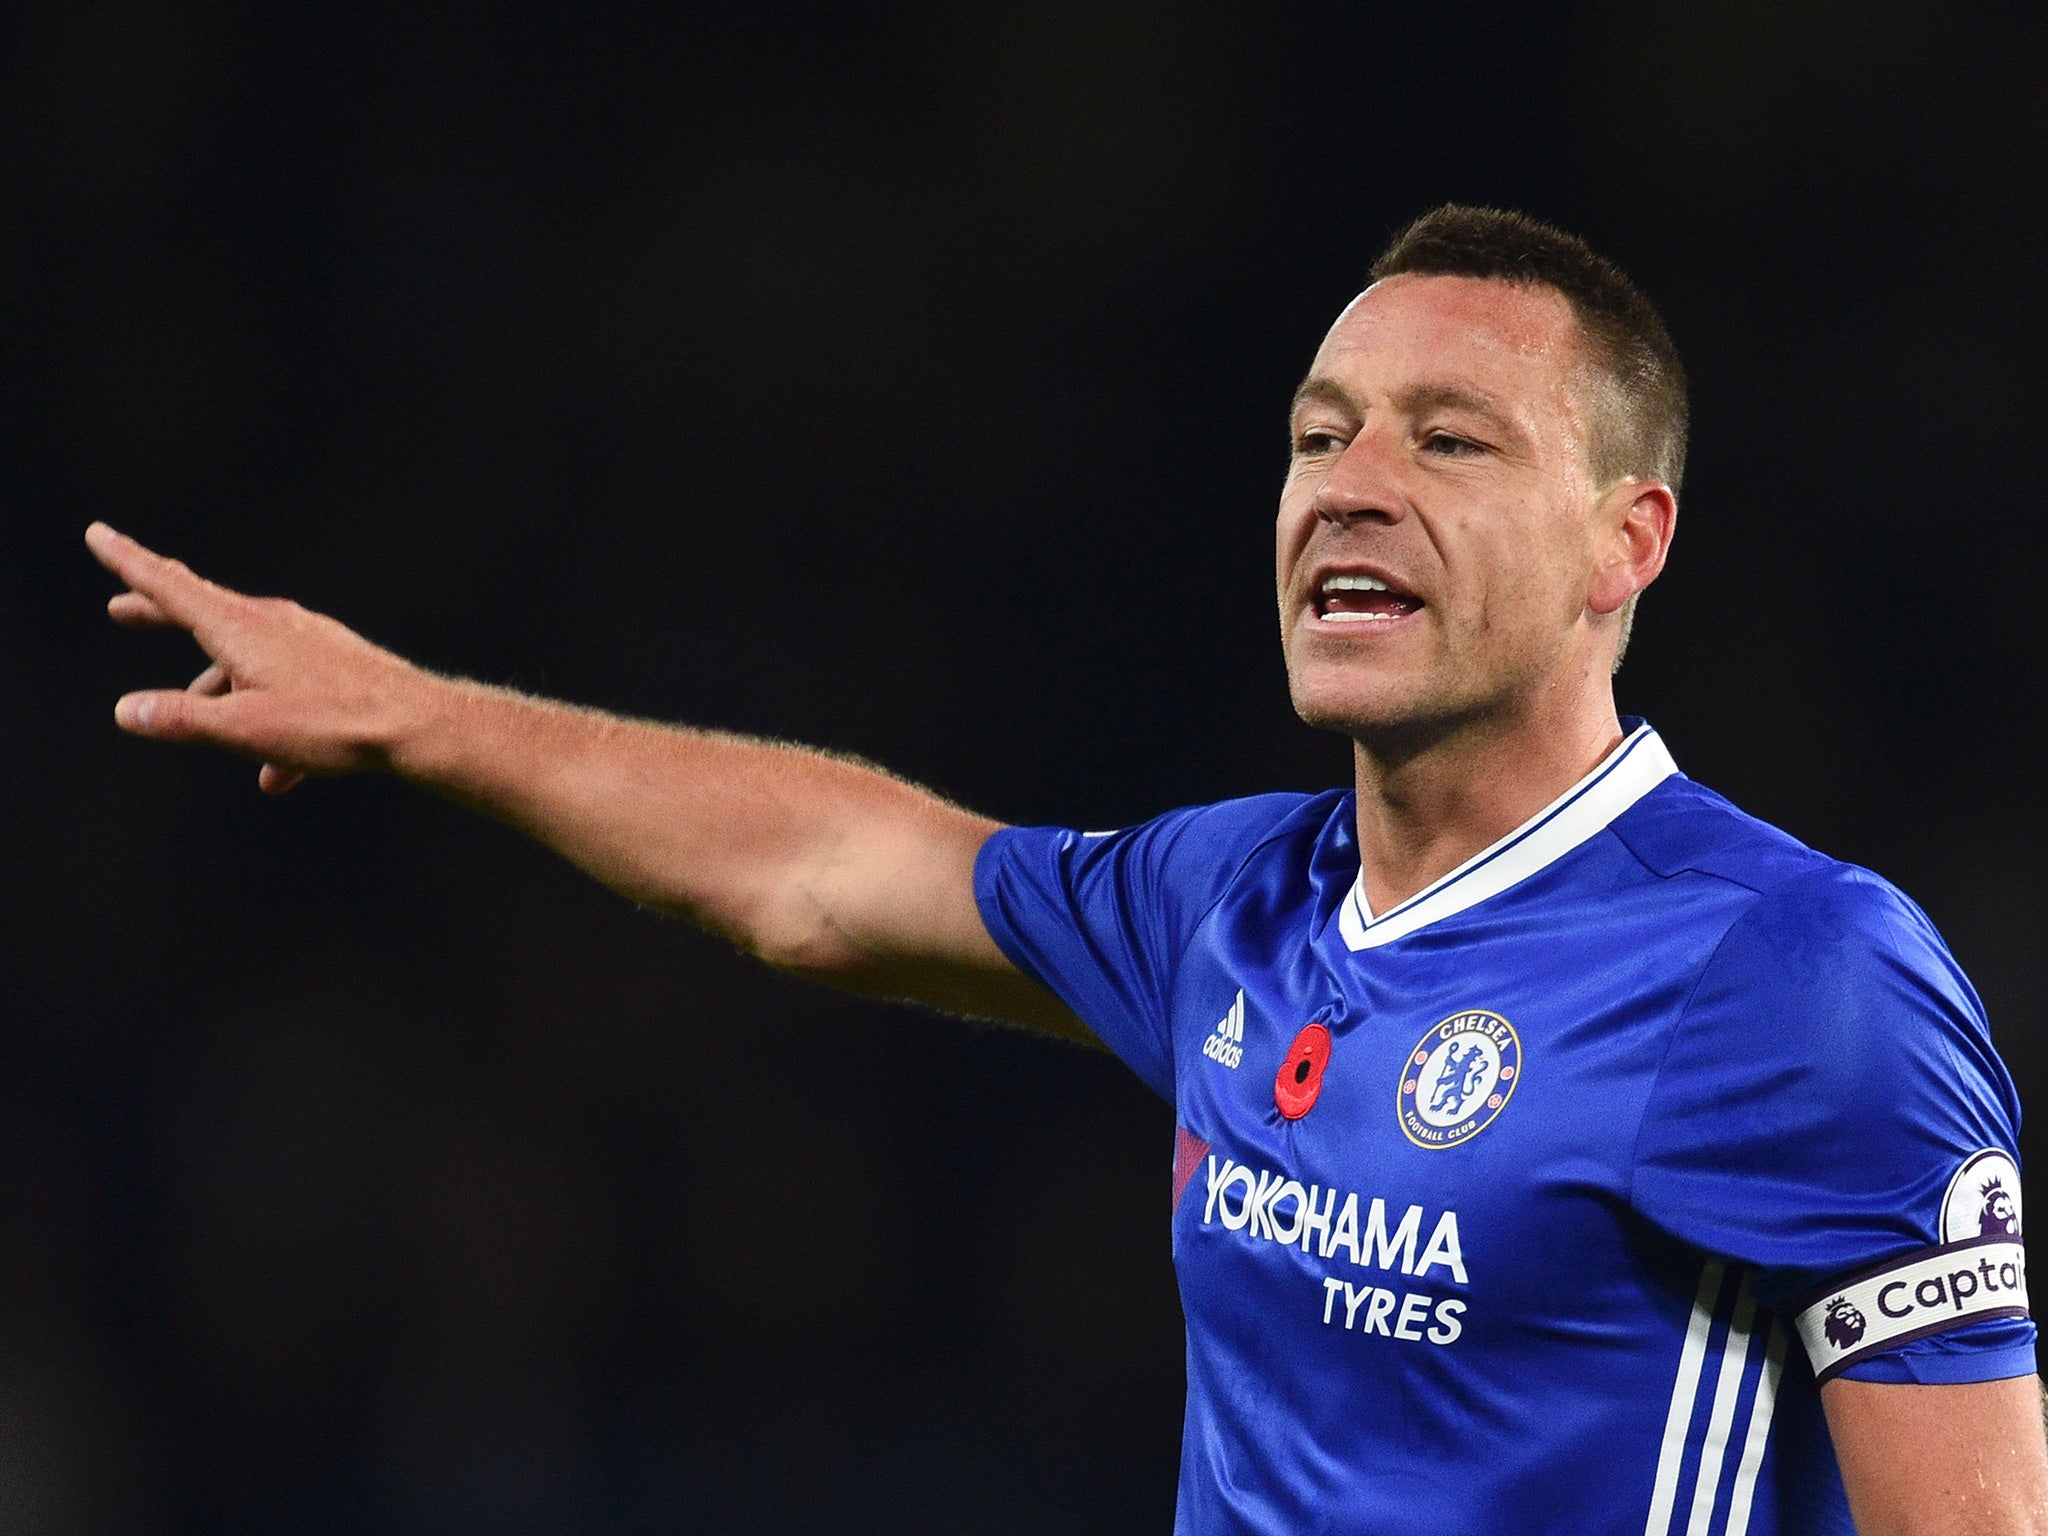 Terry has reportedly been told that he will not receive another playing contract